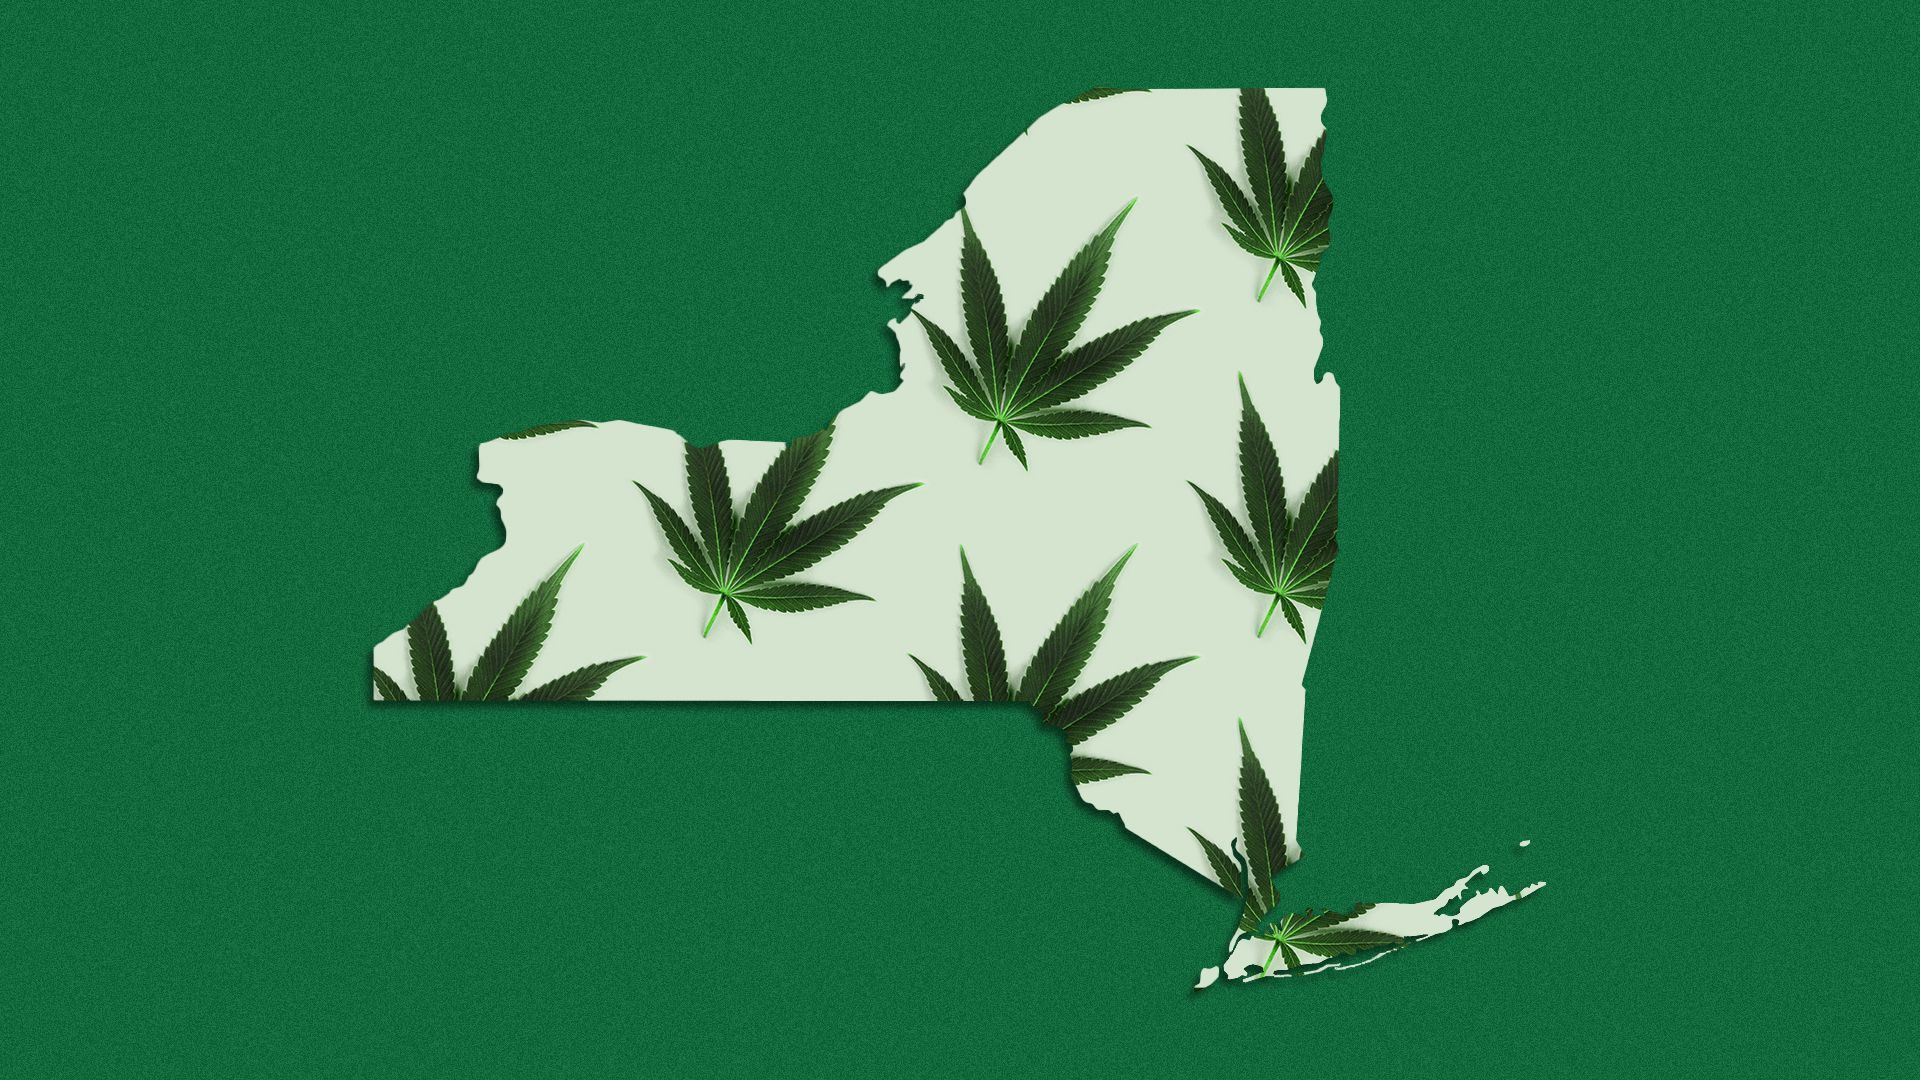 Illustration of a pattern of marijuana leaves filling the state of New York